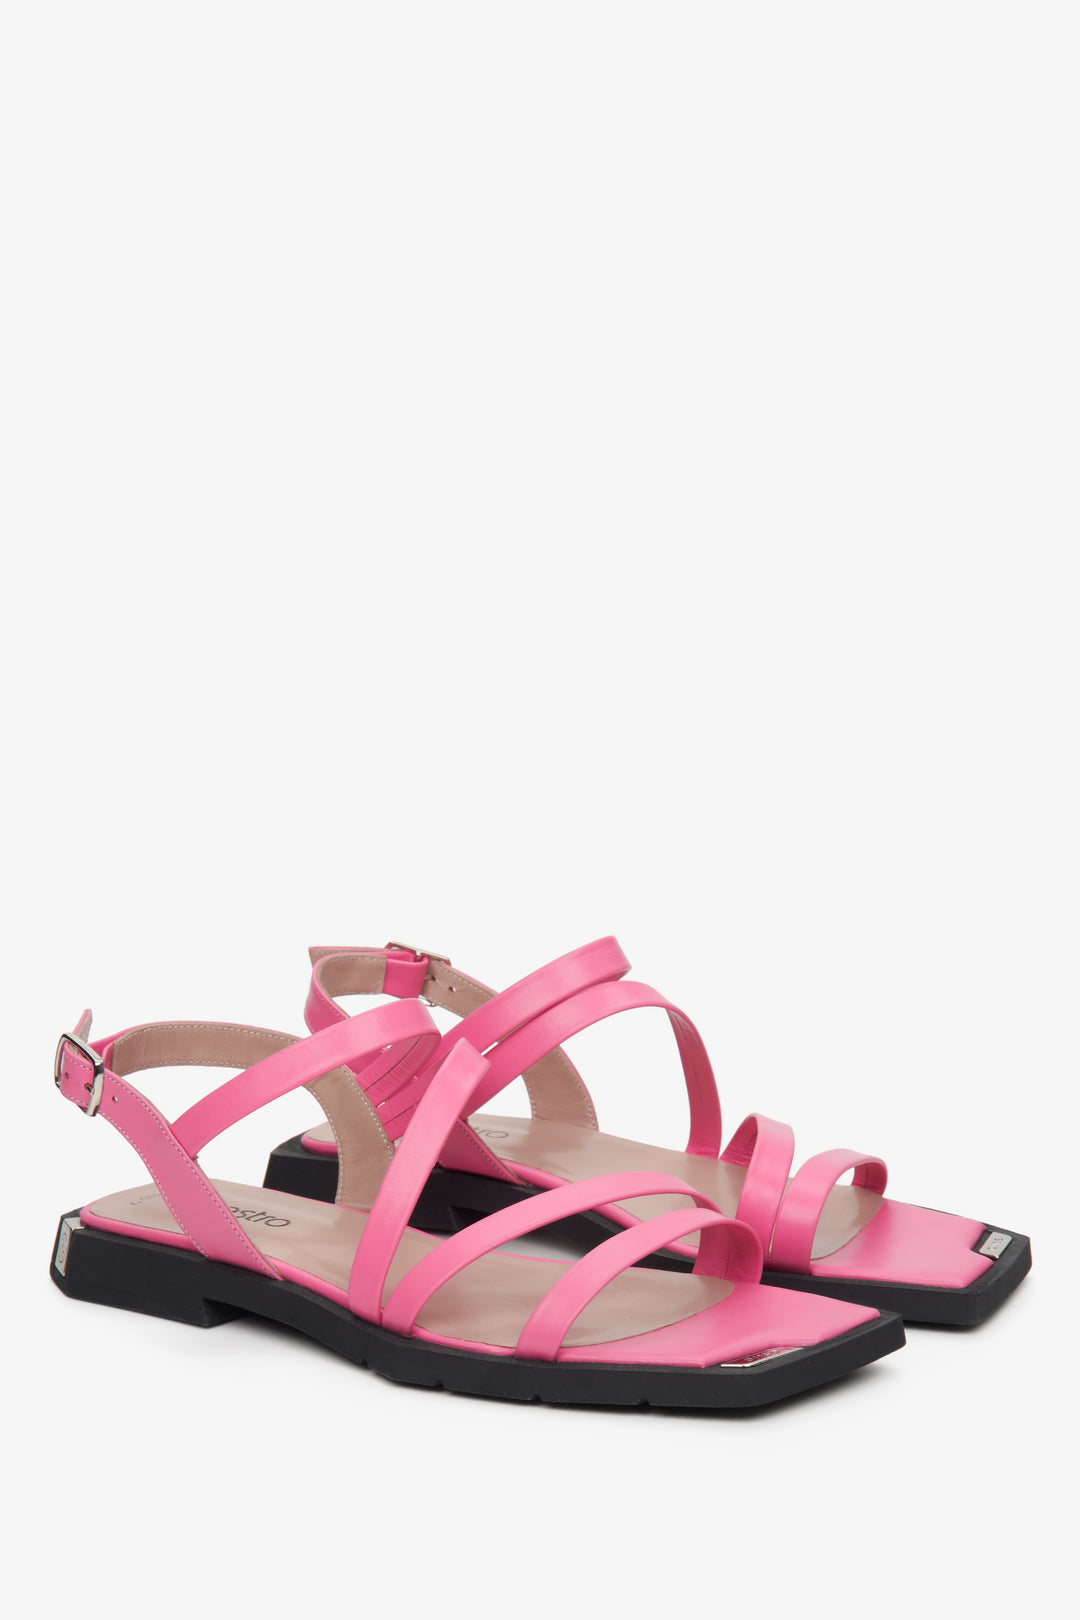 Estro's women's pink leather sandals made of genuine leather with thin straps - presentation of the front and side of the shoes.